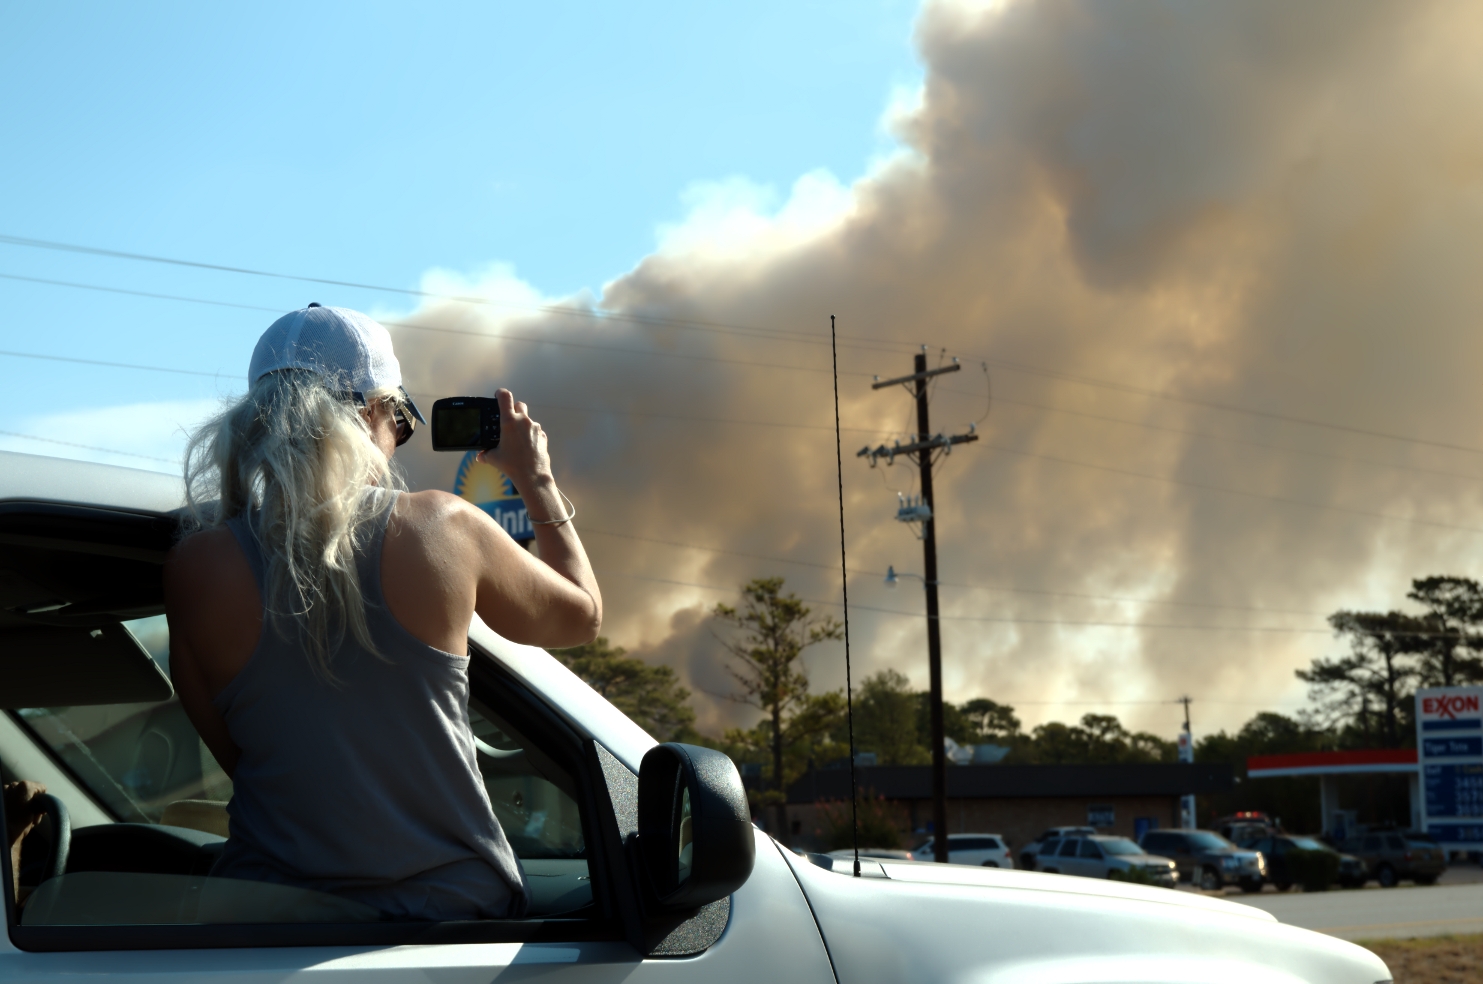 Watching the Bastrop fires in Texas, USA